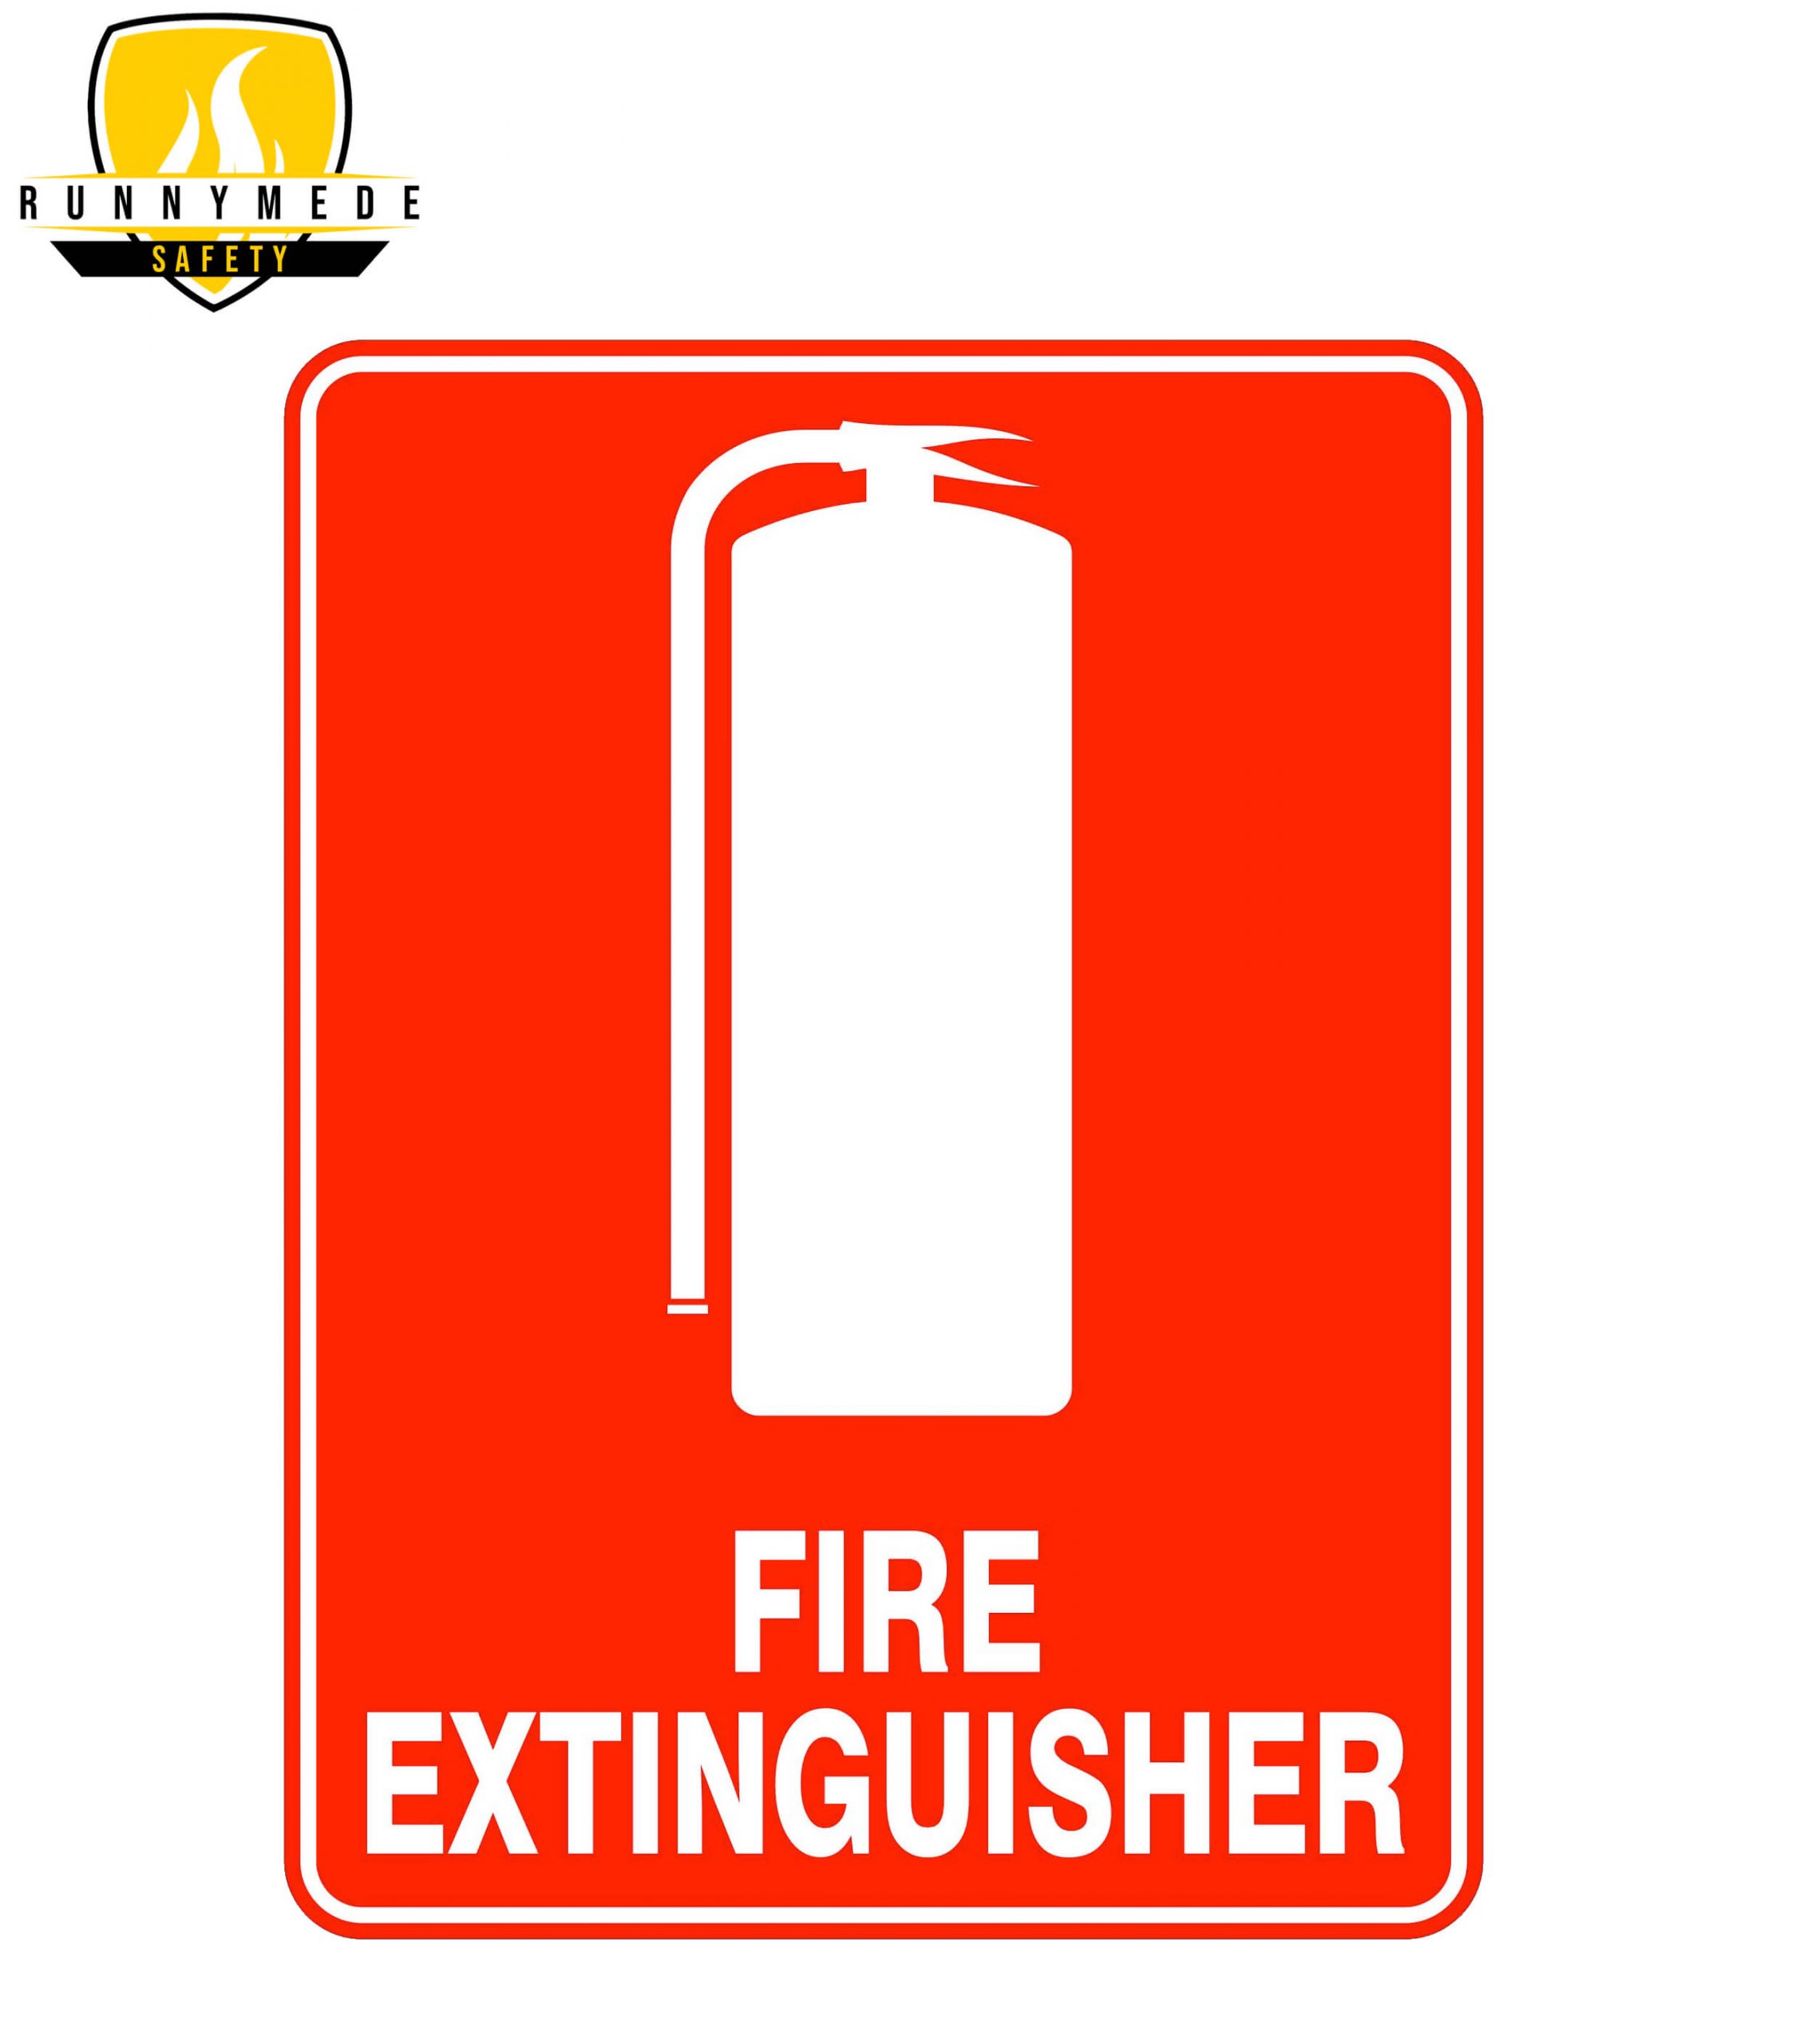 Fire Extinguisher Location Sign scaled